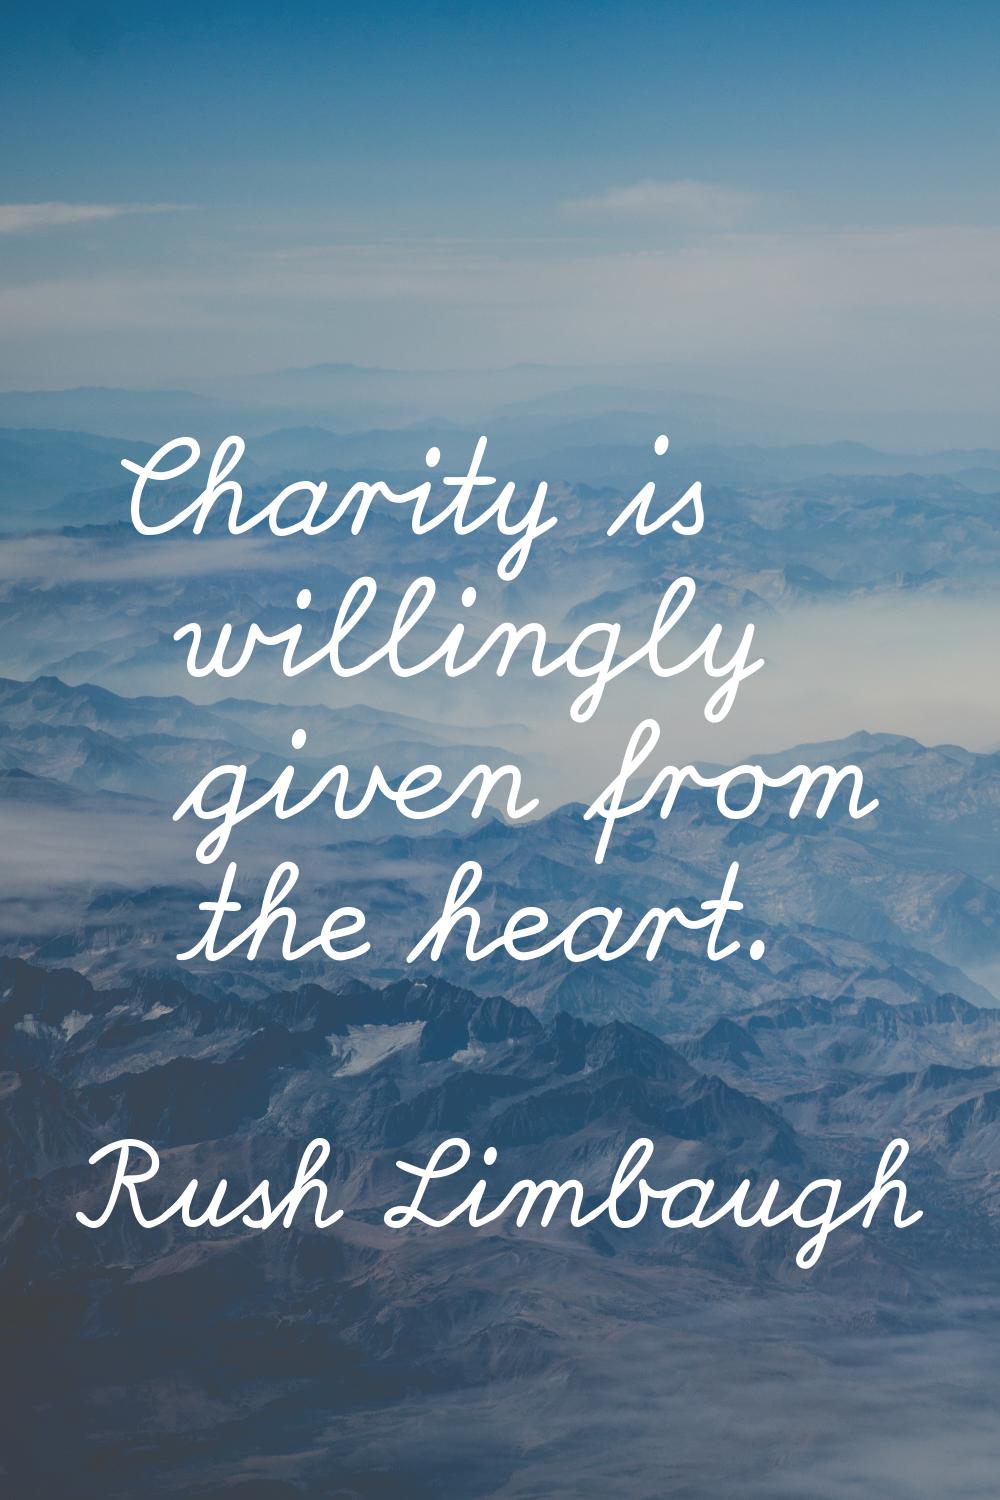 Charity is willingly given from the heart.